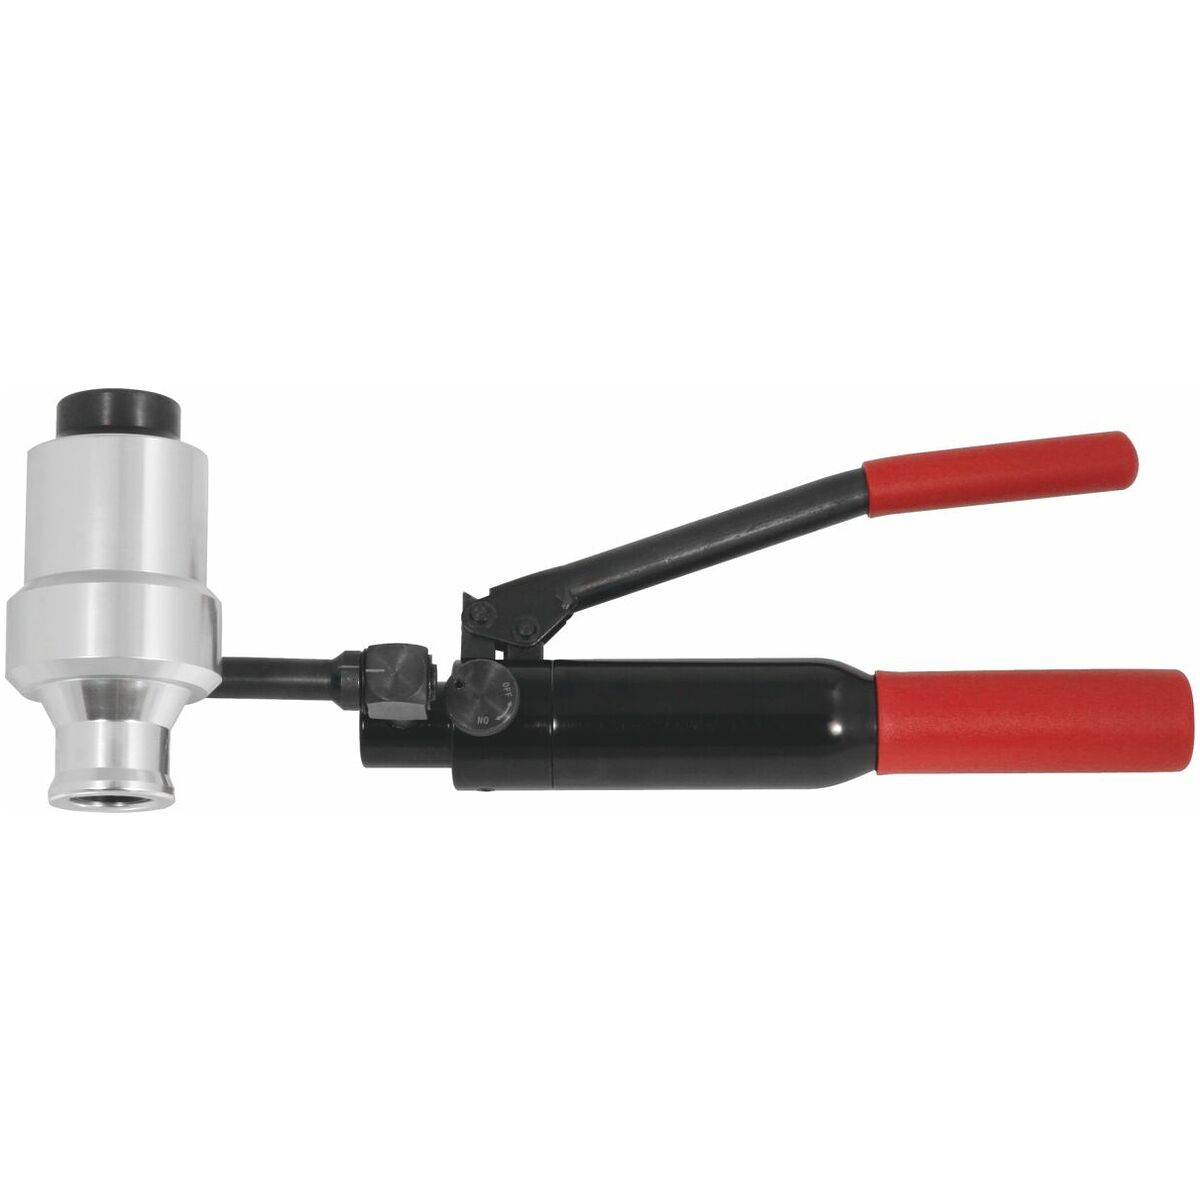 Simply buy Manual hydraulic device with pivoting cylinder in a